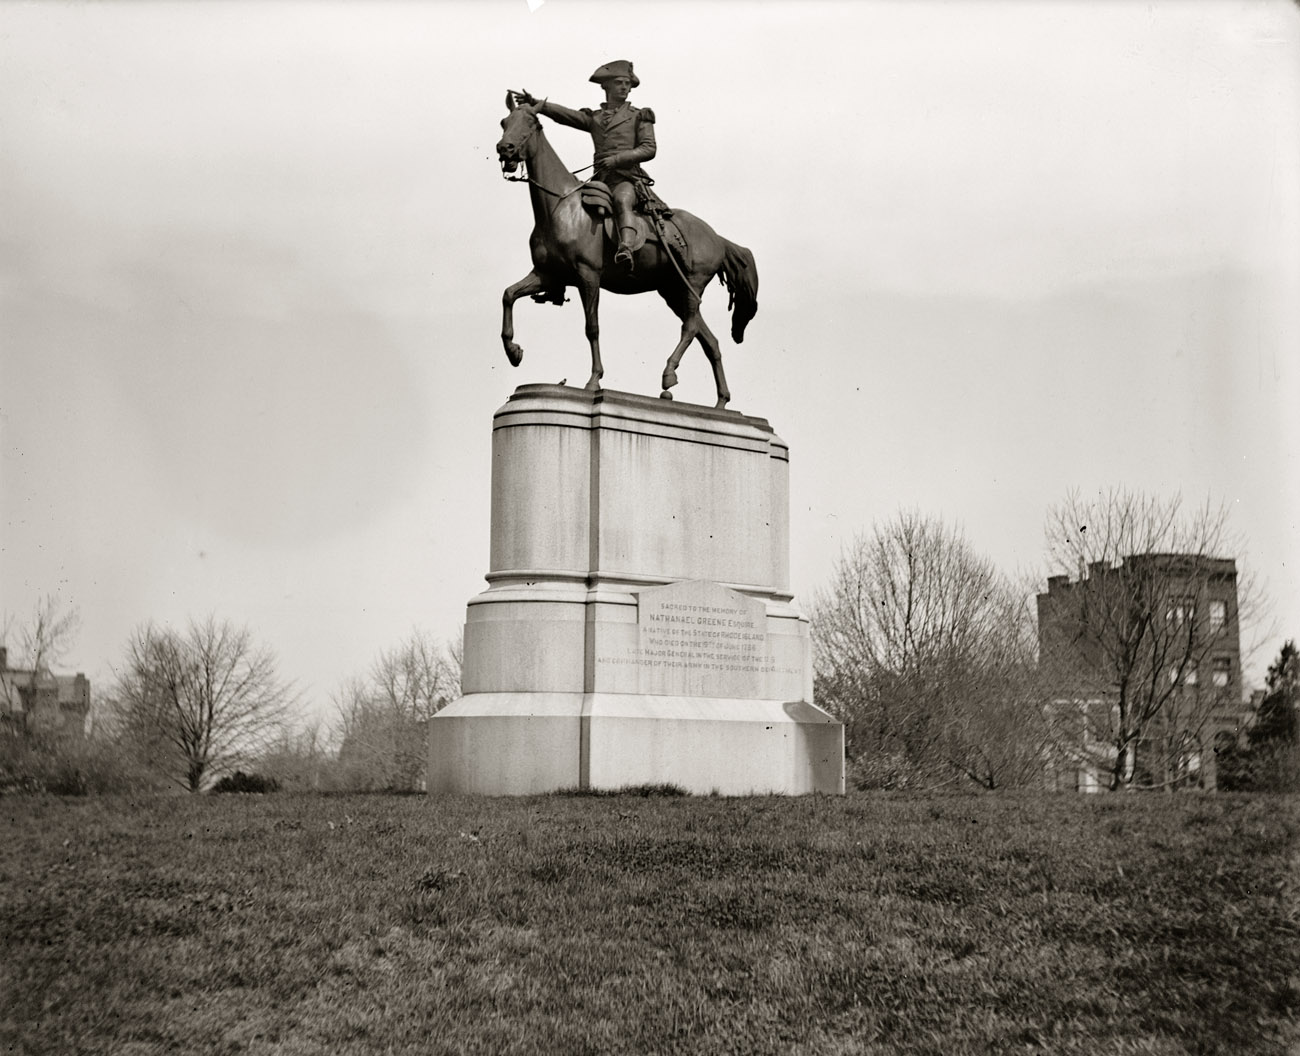 "Greene statue circa 1918." Henry Kirke Brown's bronze of the Revolutionary War hero Nathanael Greene, in a Washington, D.C., park or square whose name we can't quite remember. National Photo Company glass negative. View full size.